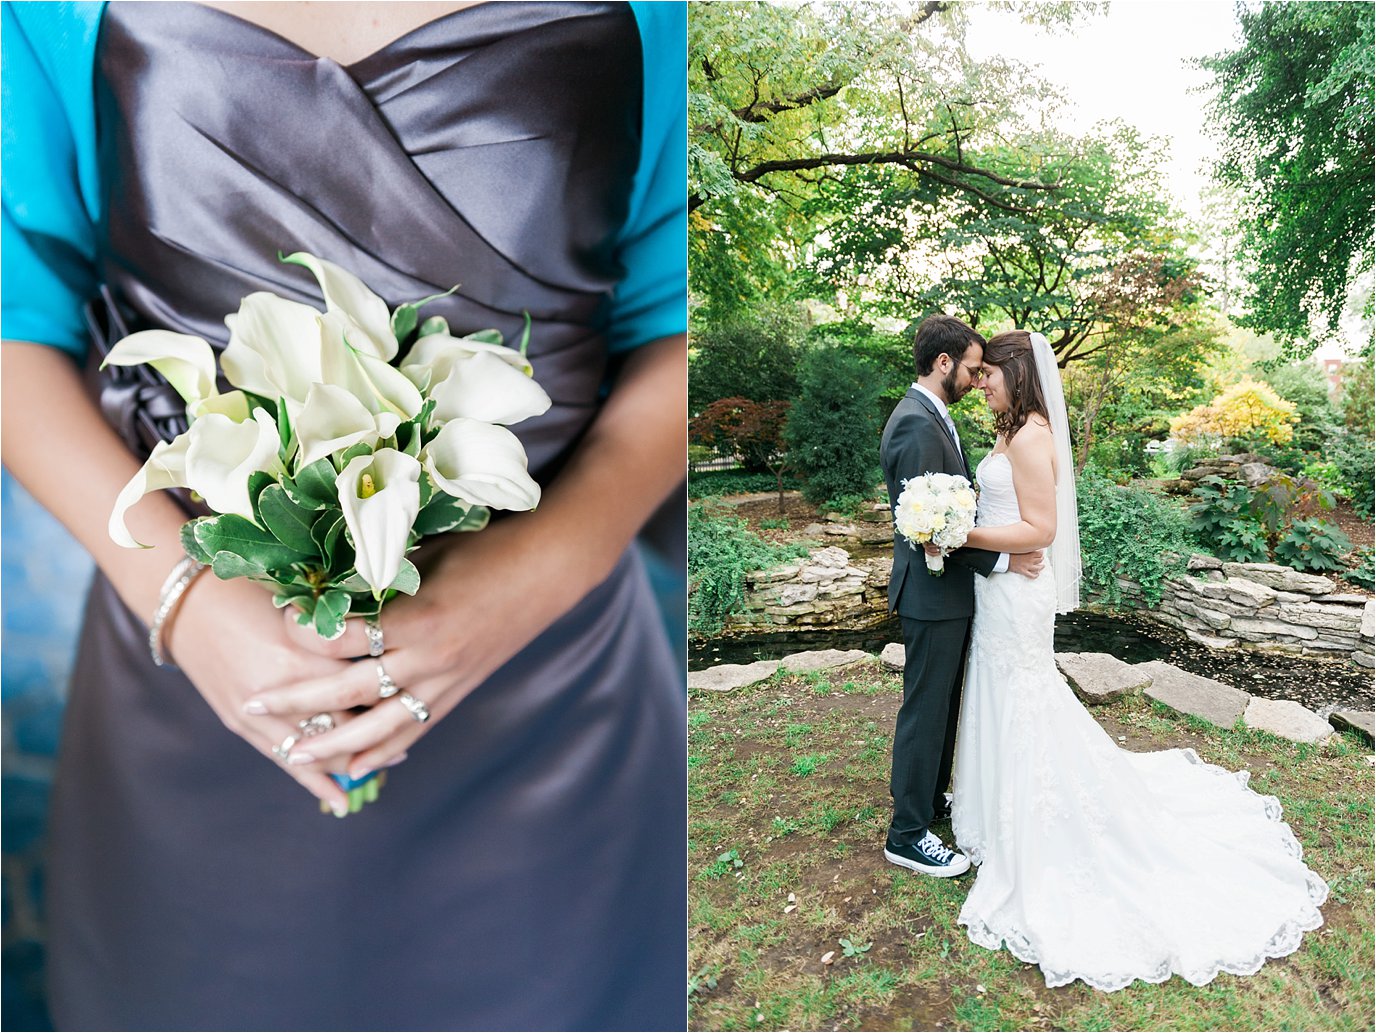 calla lily bouquet and bride and groom picture